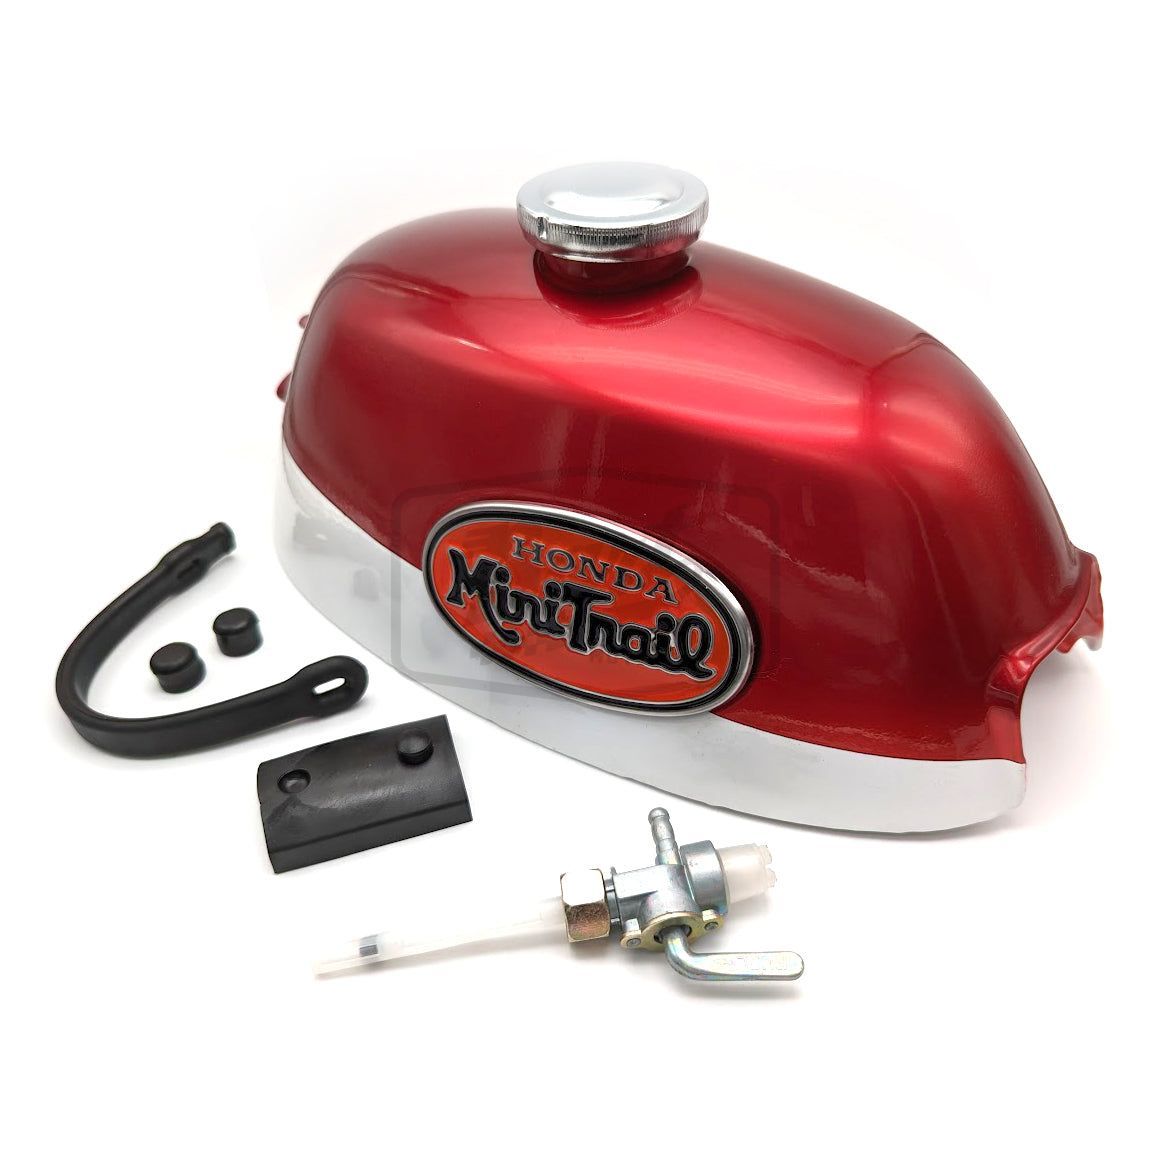 Reproduction Z50 K2 1971 Gas Fuel Tank Full Kit (Ruby Red)